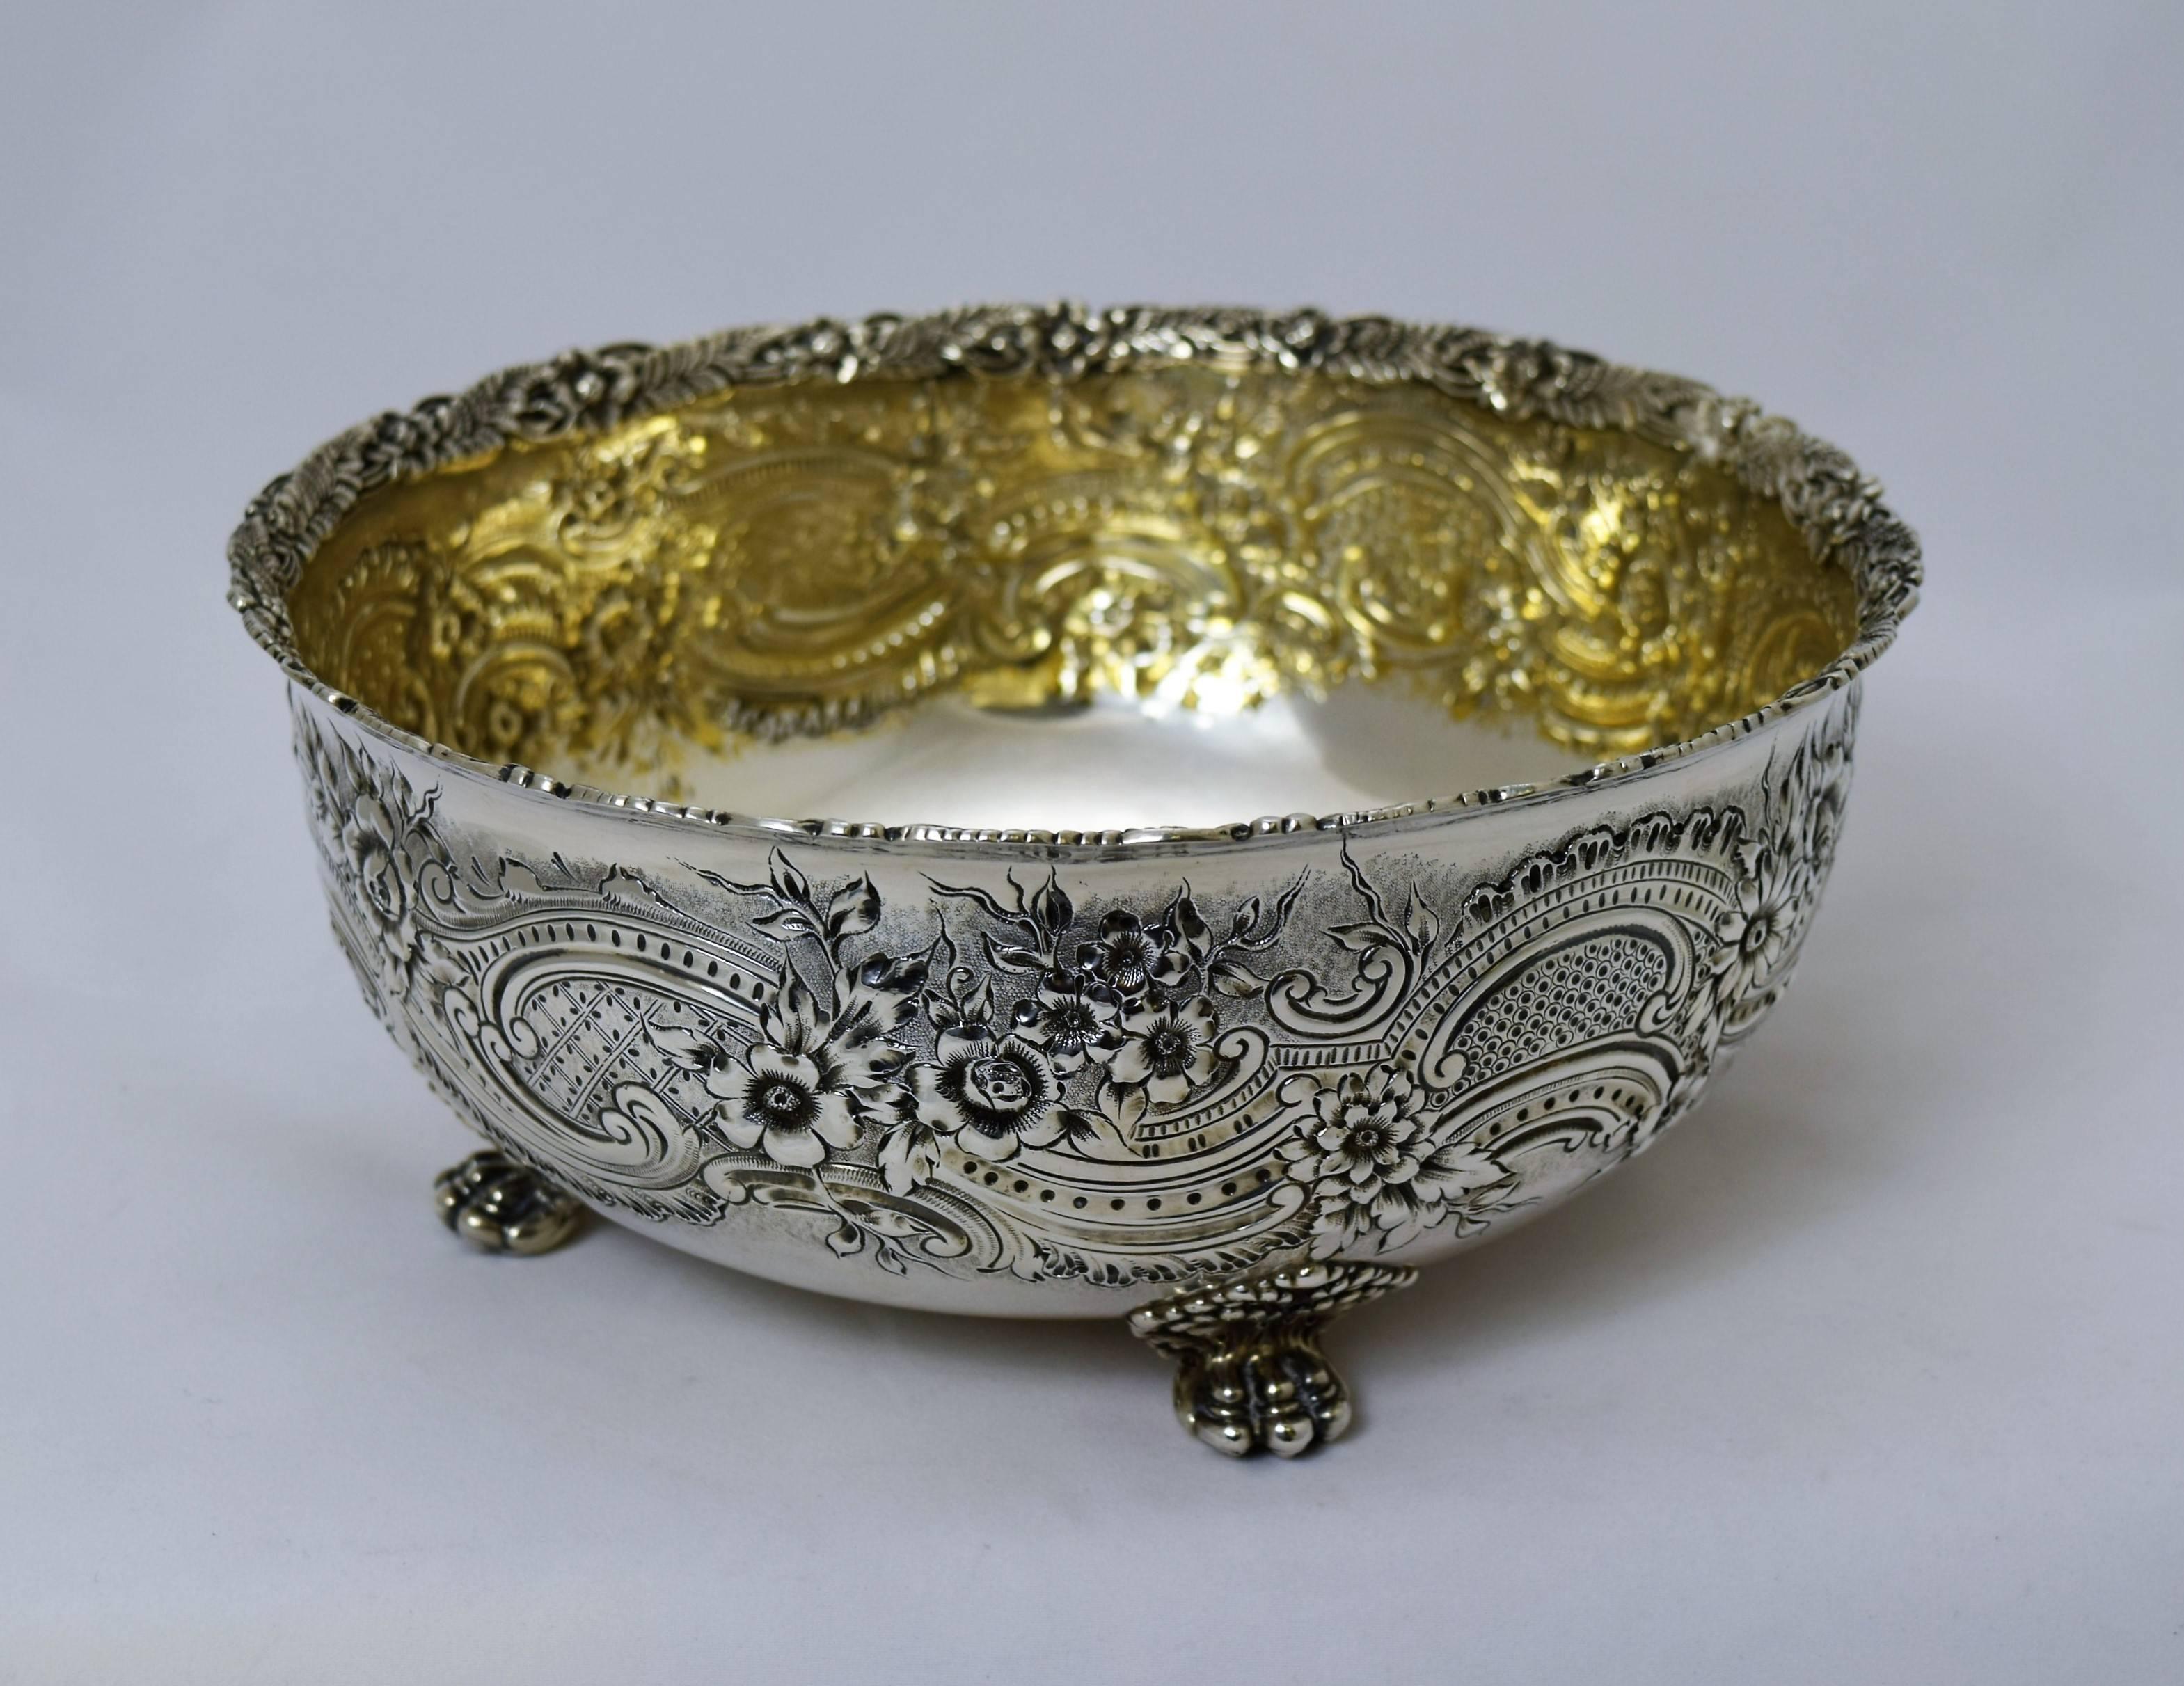 Being offered is a sterling silver bowl made by Tiffany & Co. of New York.